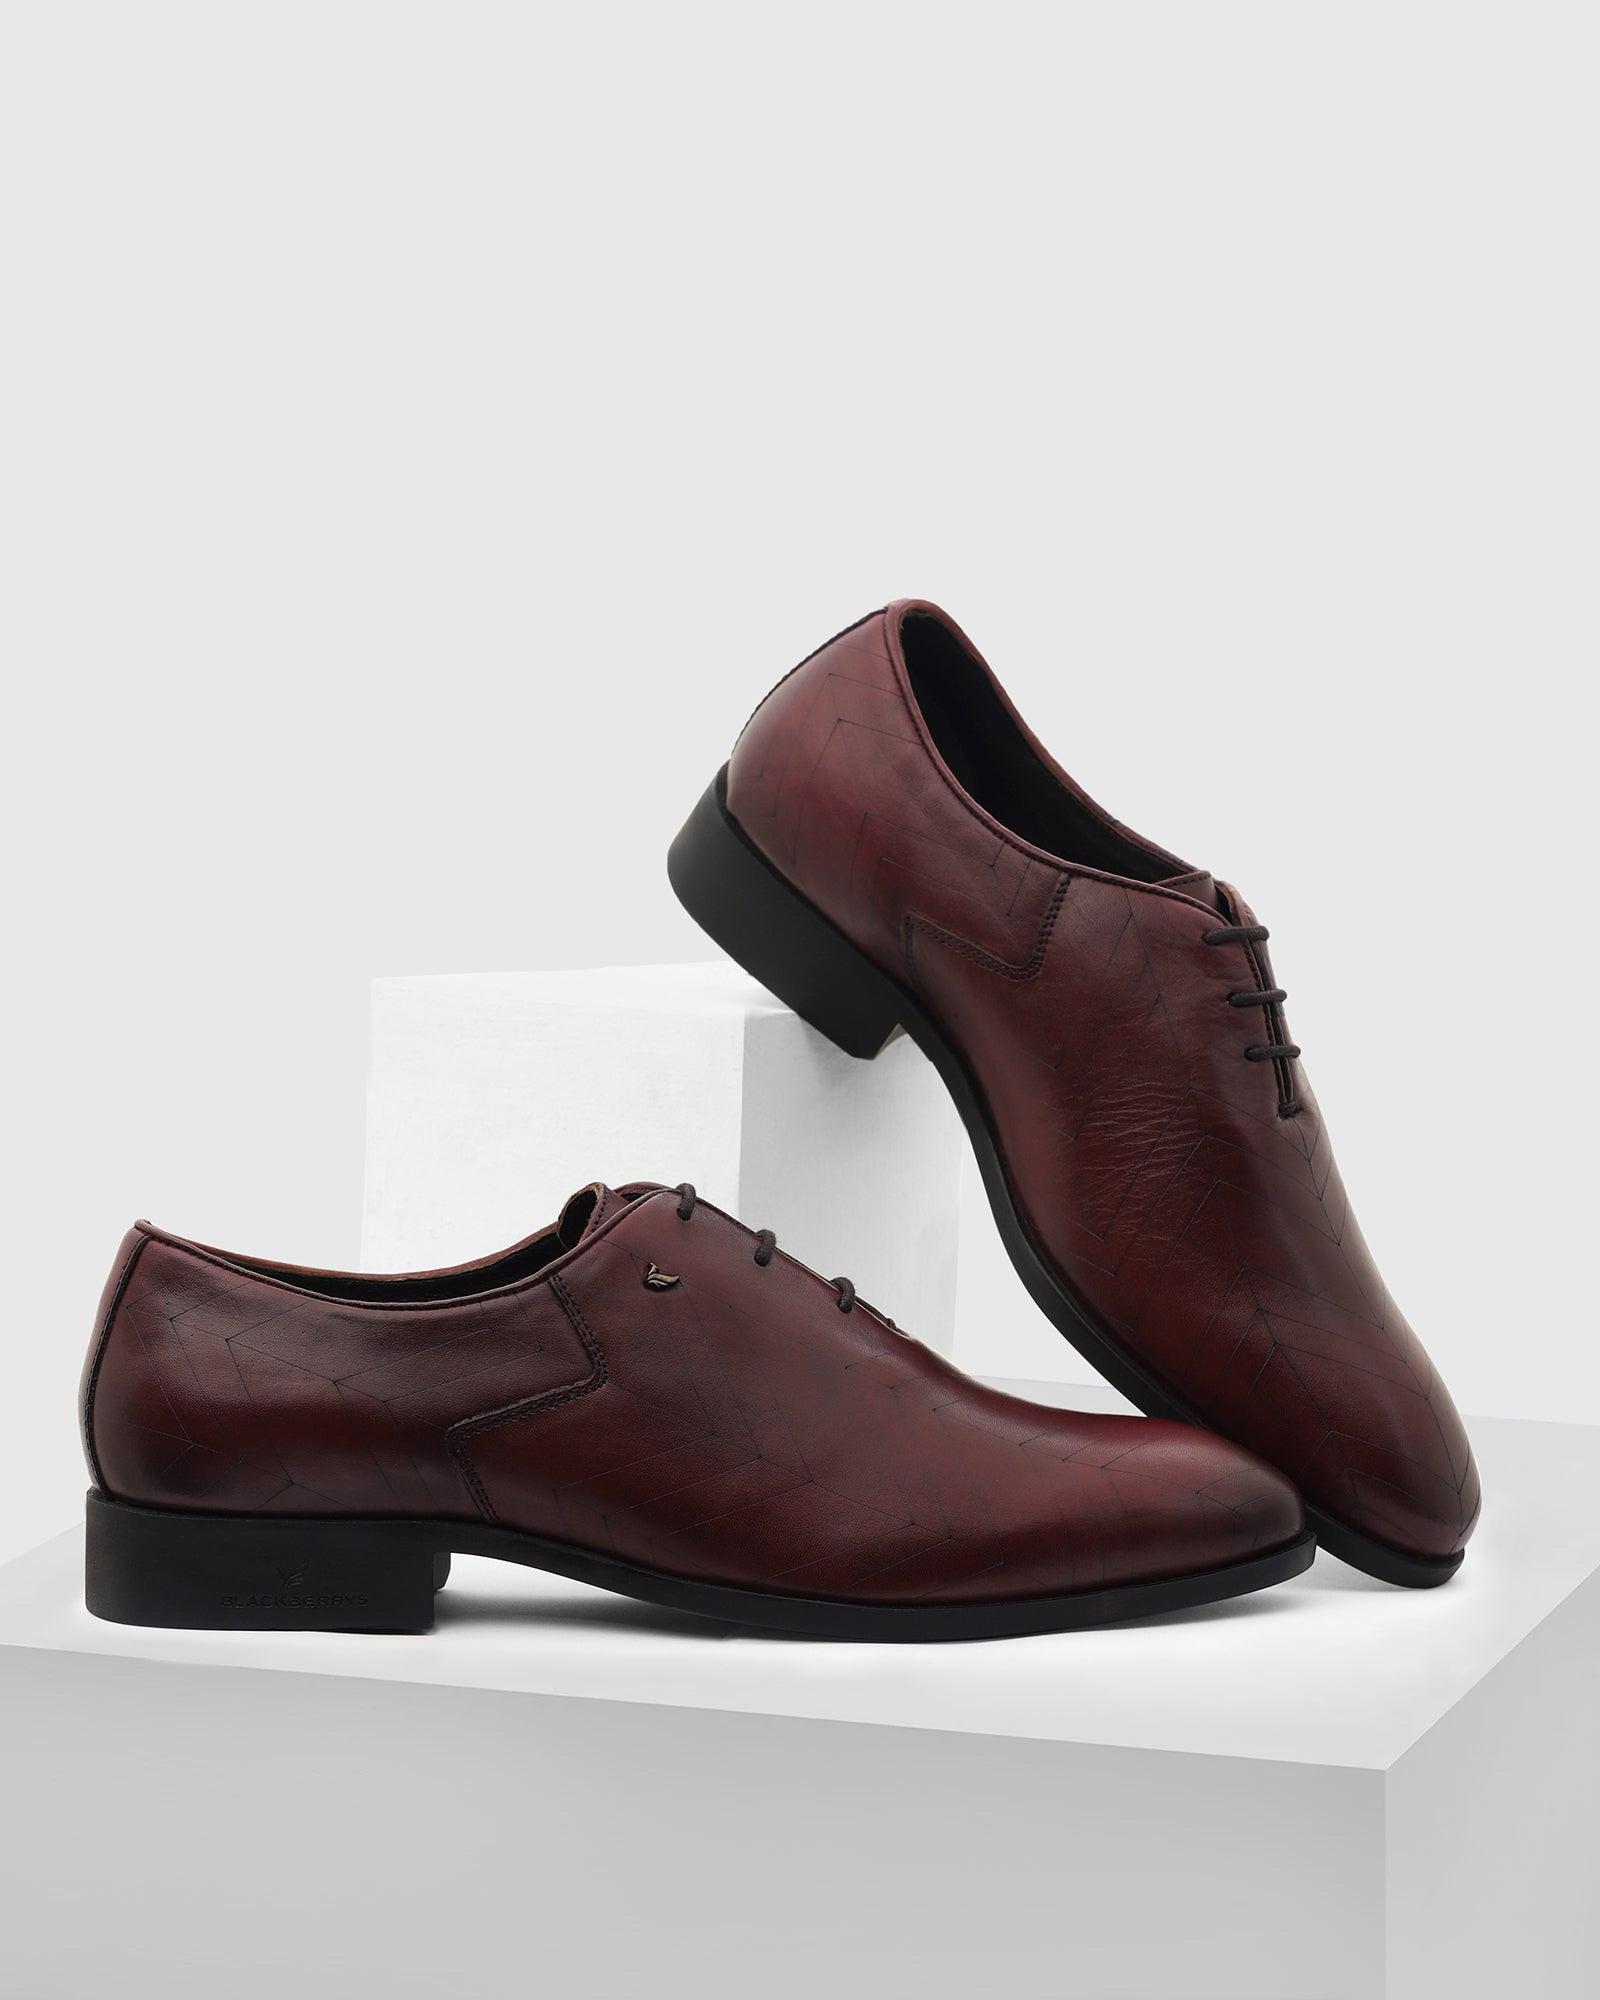 leather formal burgandy solid oxford shoes - prob